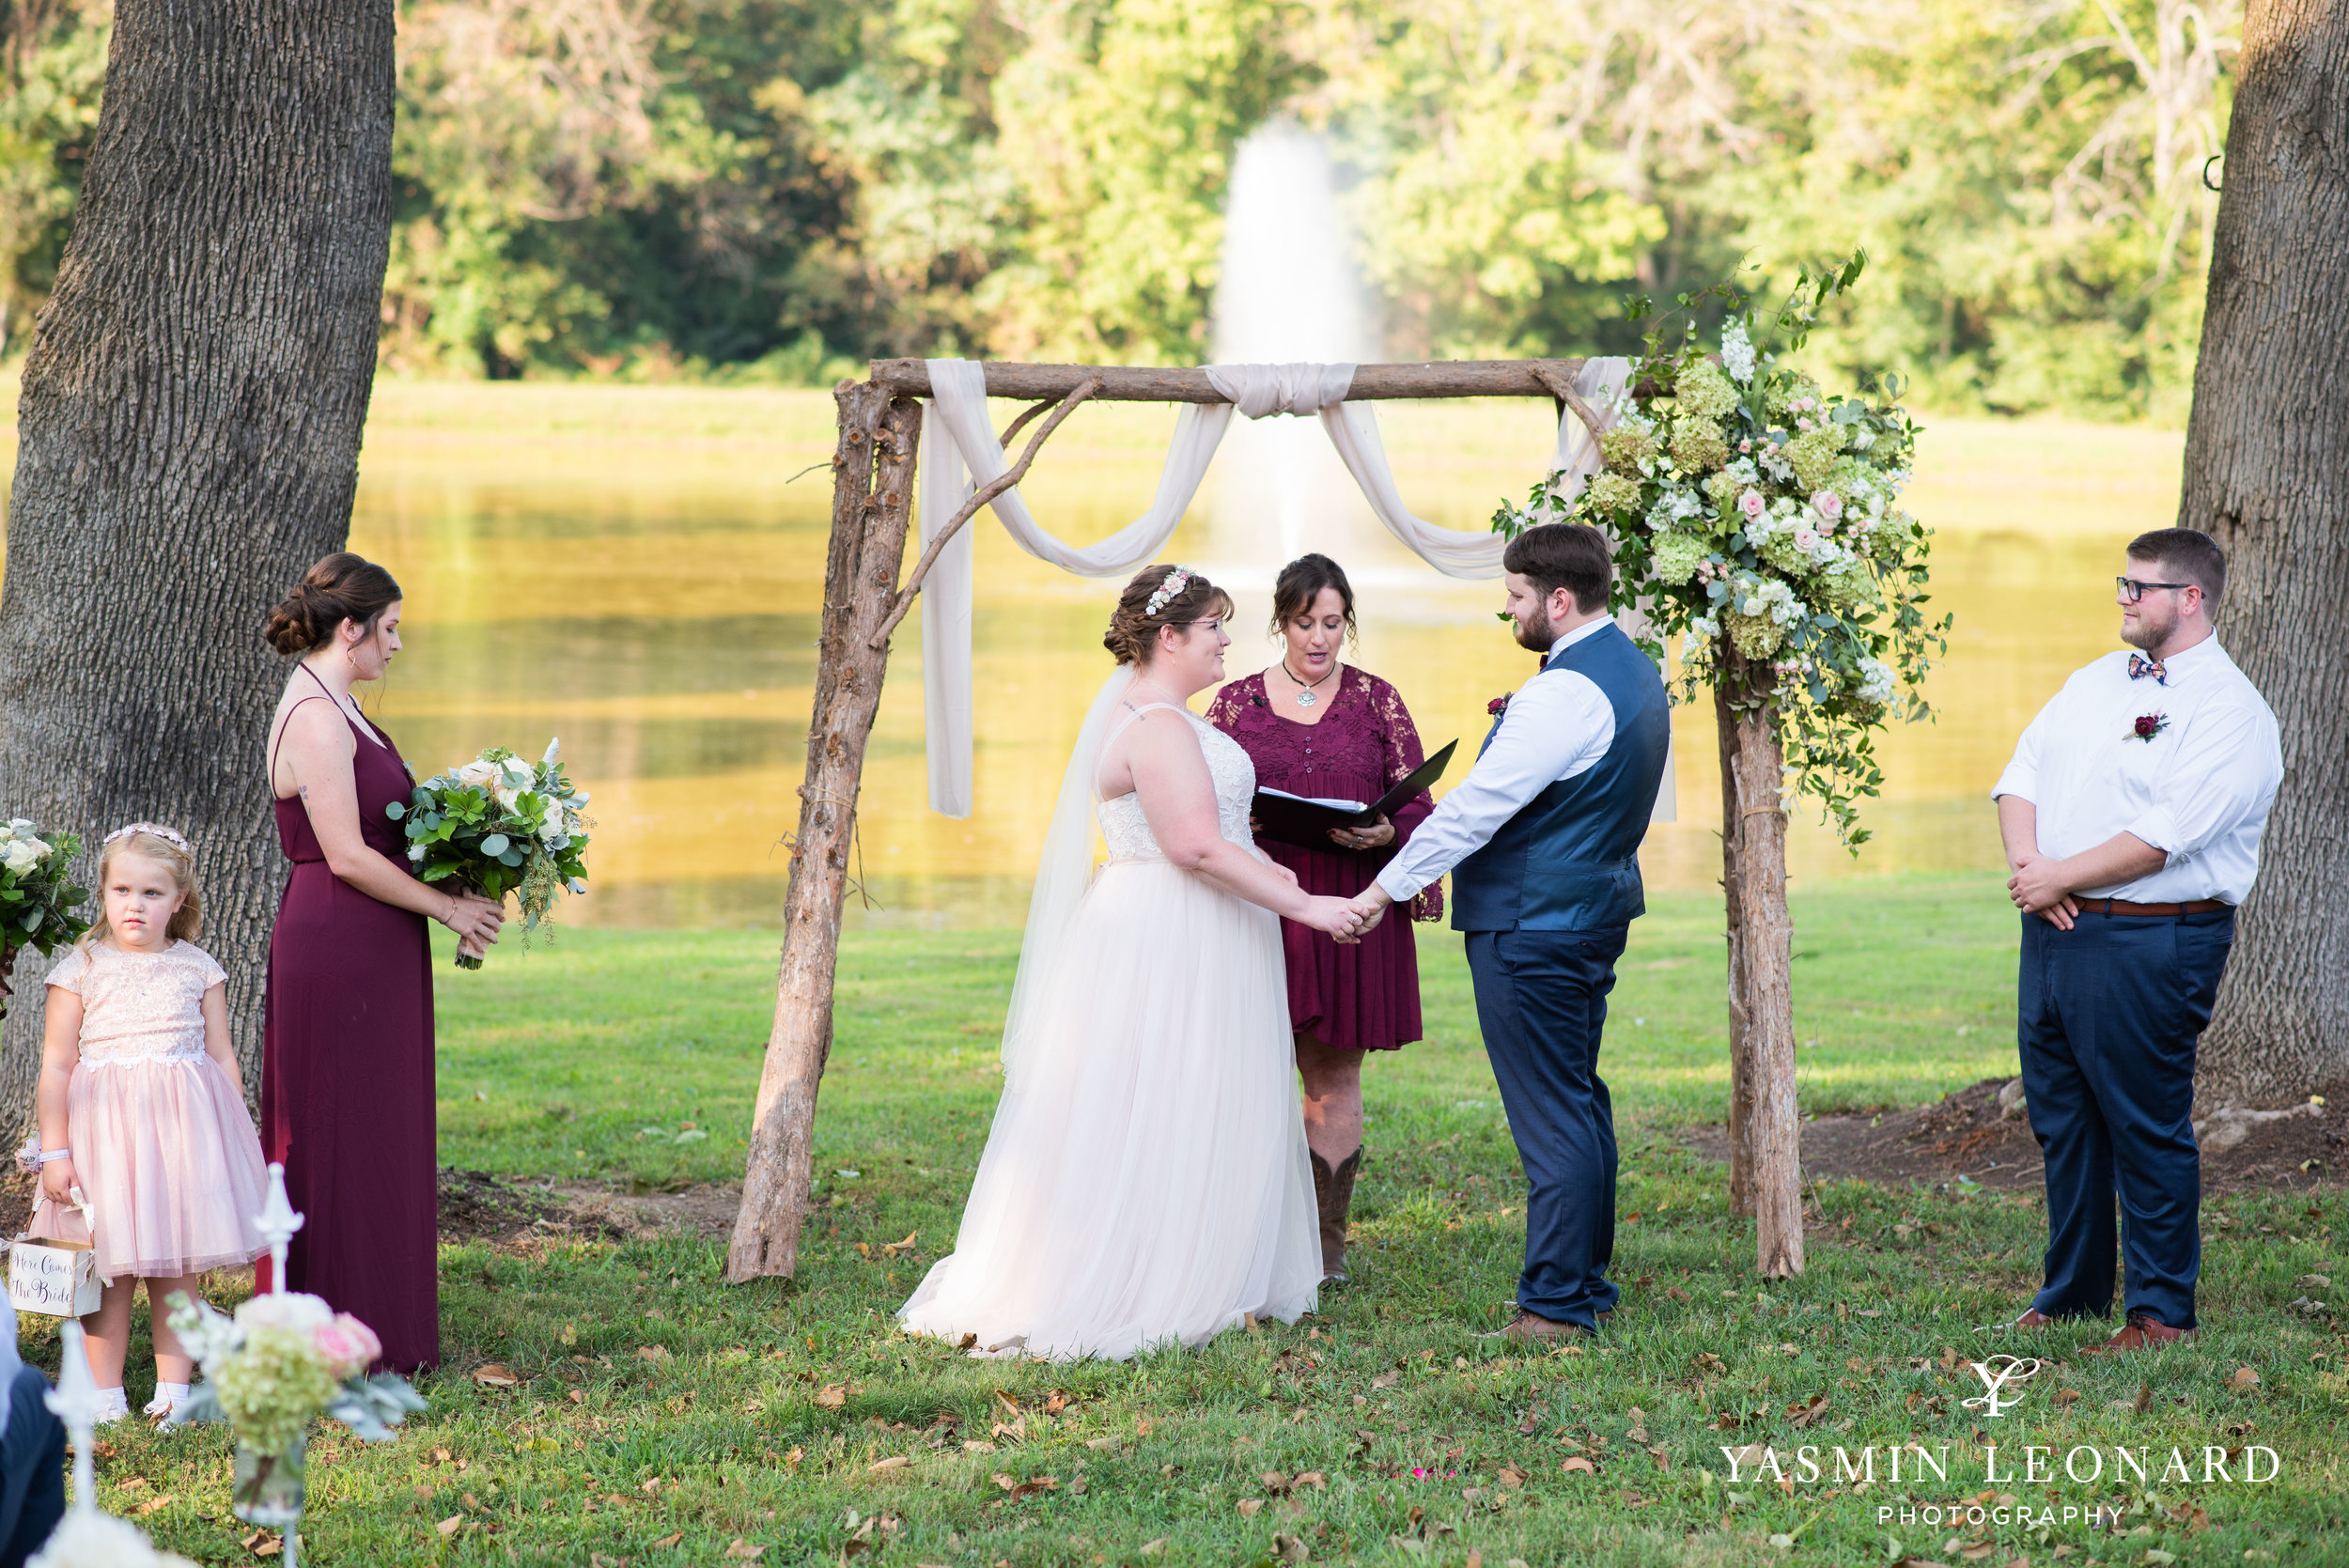 Hannah and David - l'abri at Linwood - NC Barn Weddings - Guys and Girls on Bride's Side - How to incorporate guys with bridesmaids - navy fall wedding - high point photographer - nc wedding venues - triad weddings-25.jpg